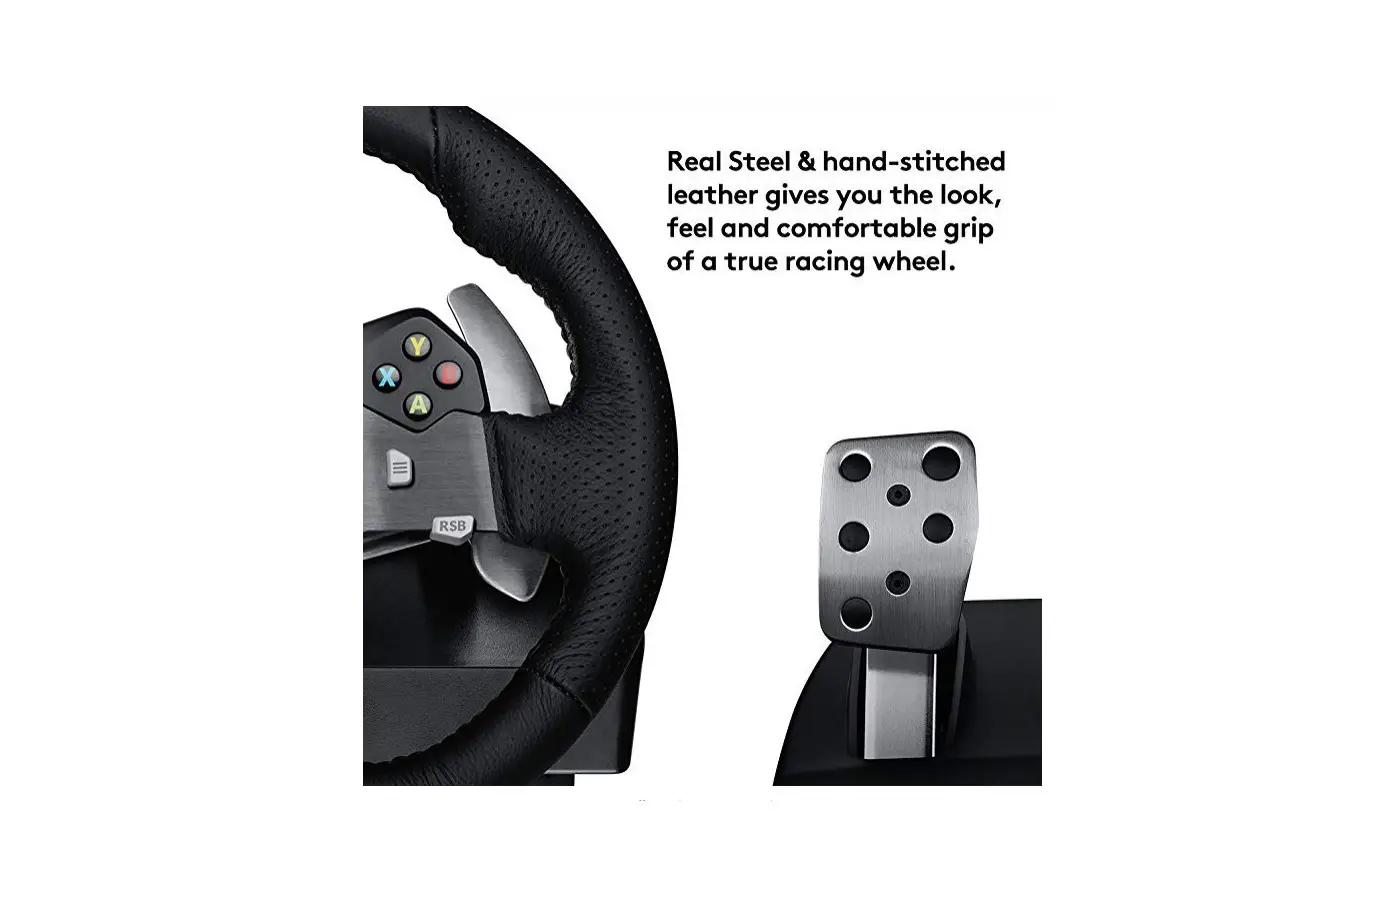 You will feel like you are really racing with this controller set up.